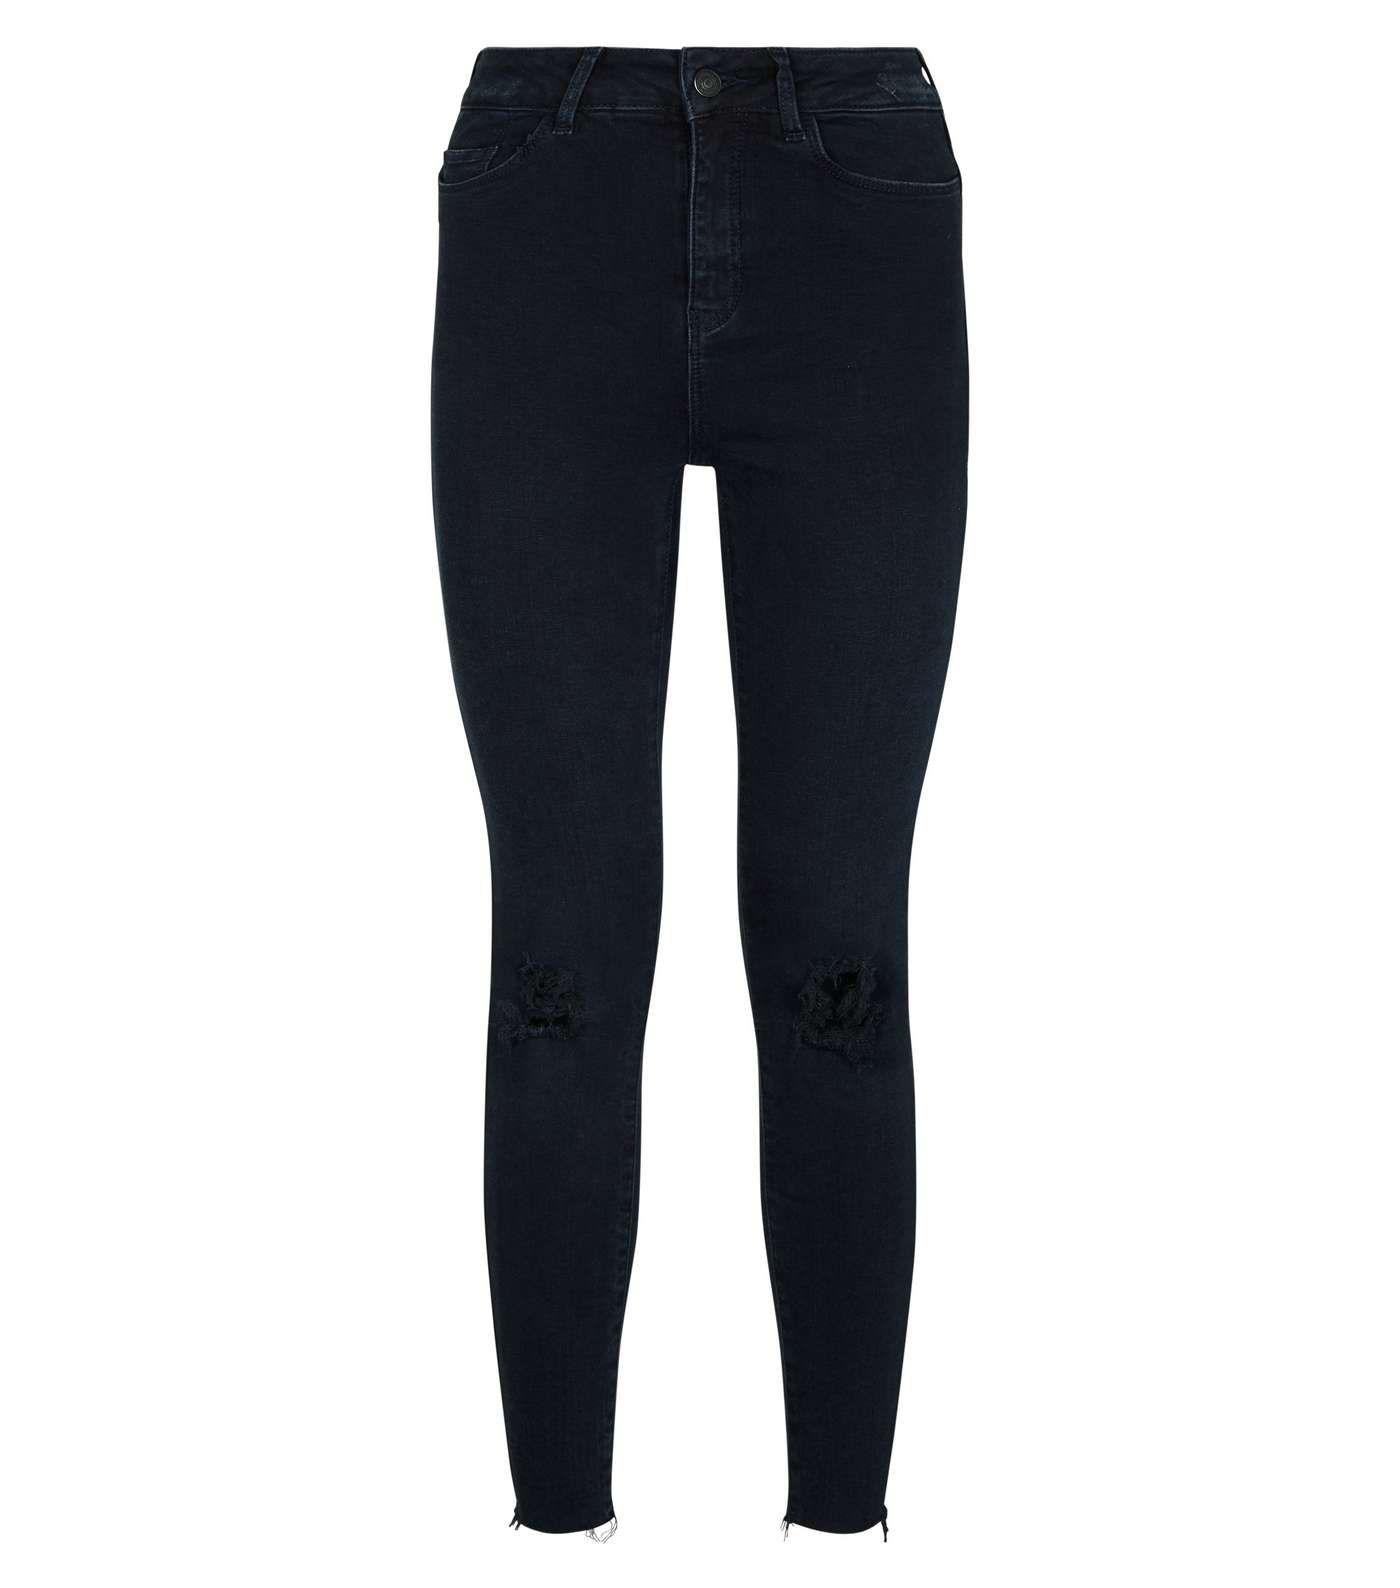 Navy Ripped Super Skinny 'Lift & Shape' Jeans Image 4